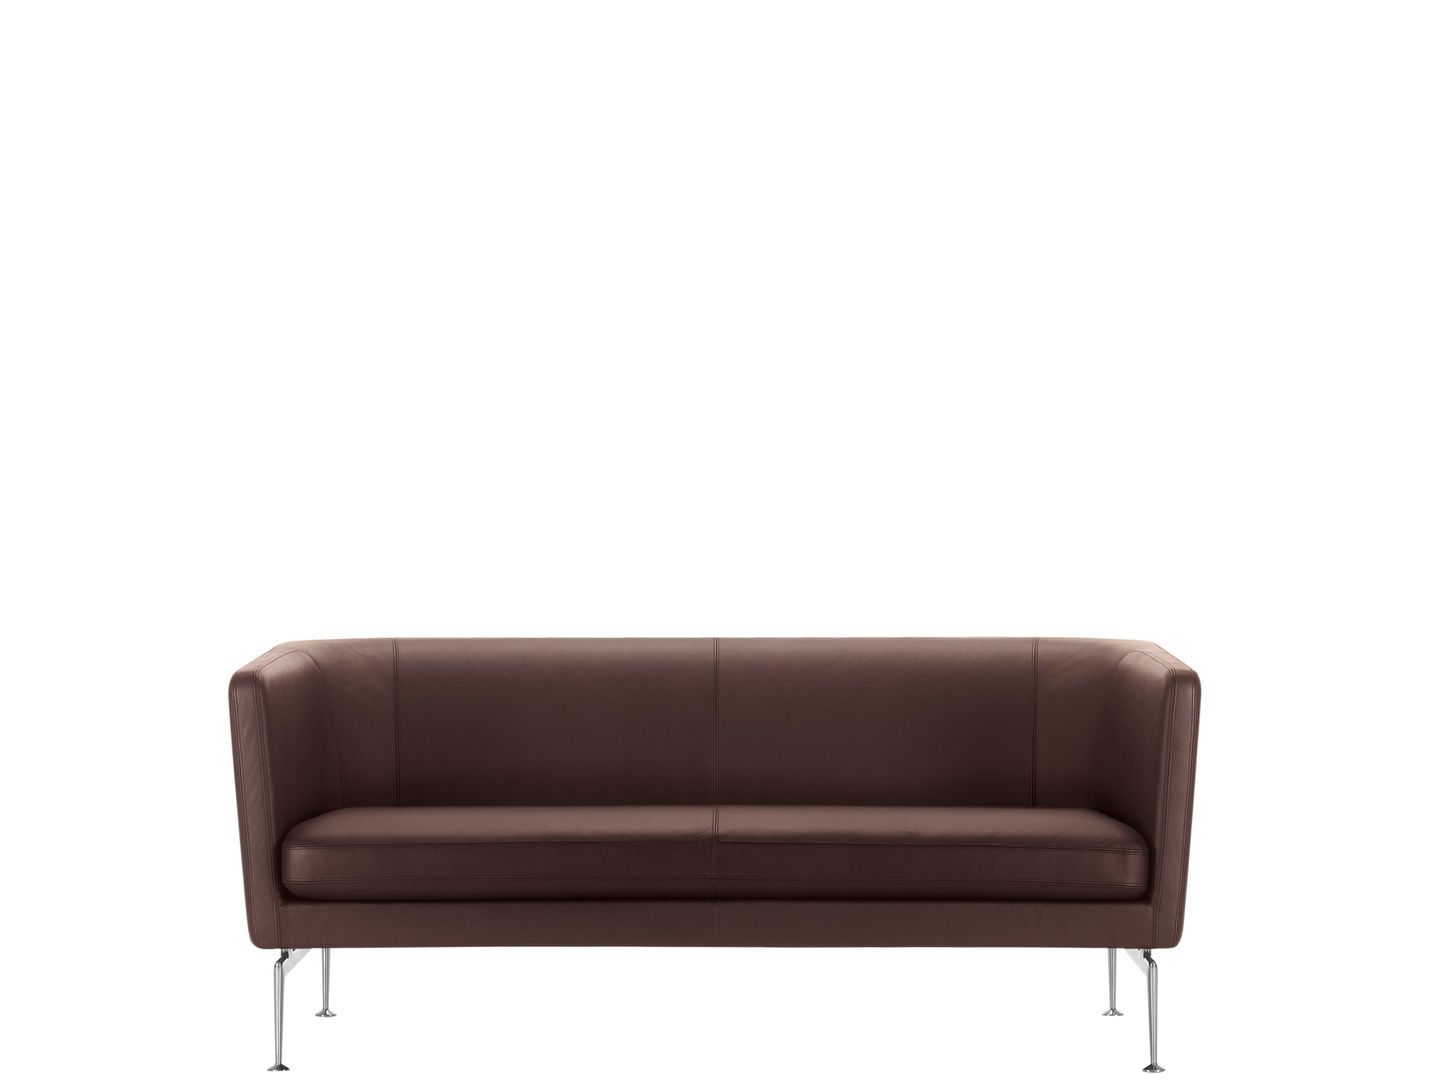 Vitra Suita Club Sofa - A modern and stylish seating solution for any living space from One52 Furniture.